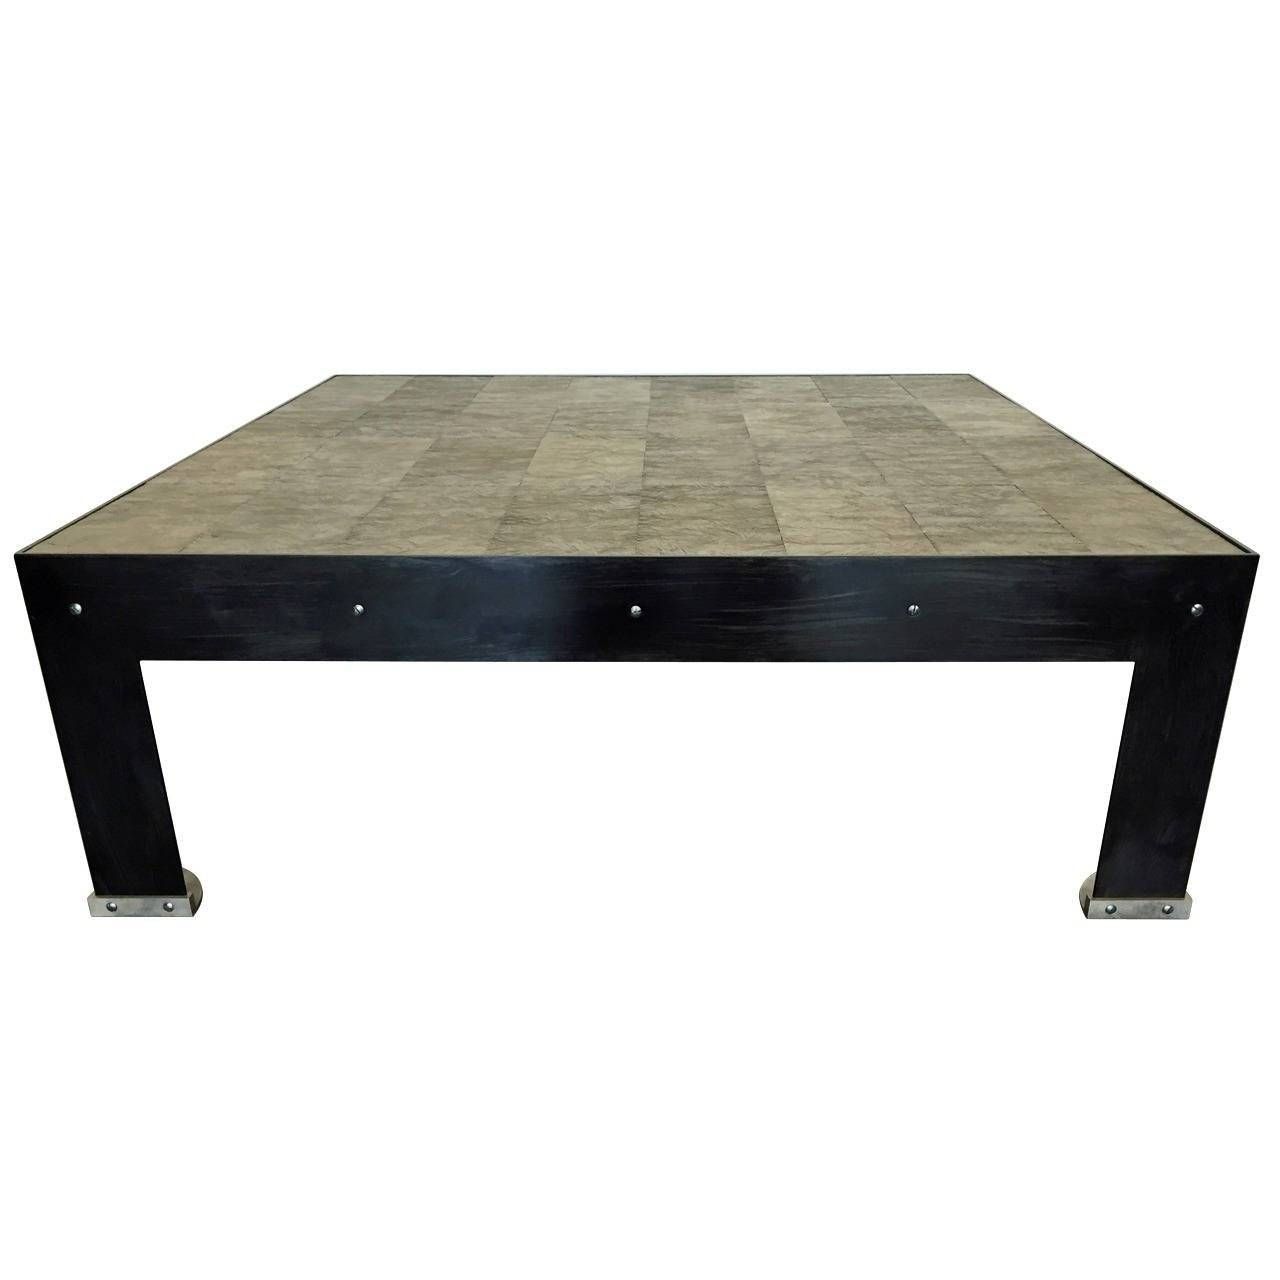 Stunning Paul Dupre Lafon Inspired Coffee Table In Blackened Steel Intended For Bronze Coffee Tables (View 8 of 30)